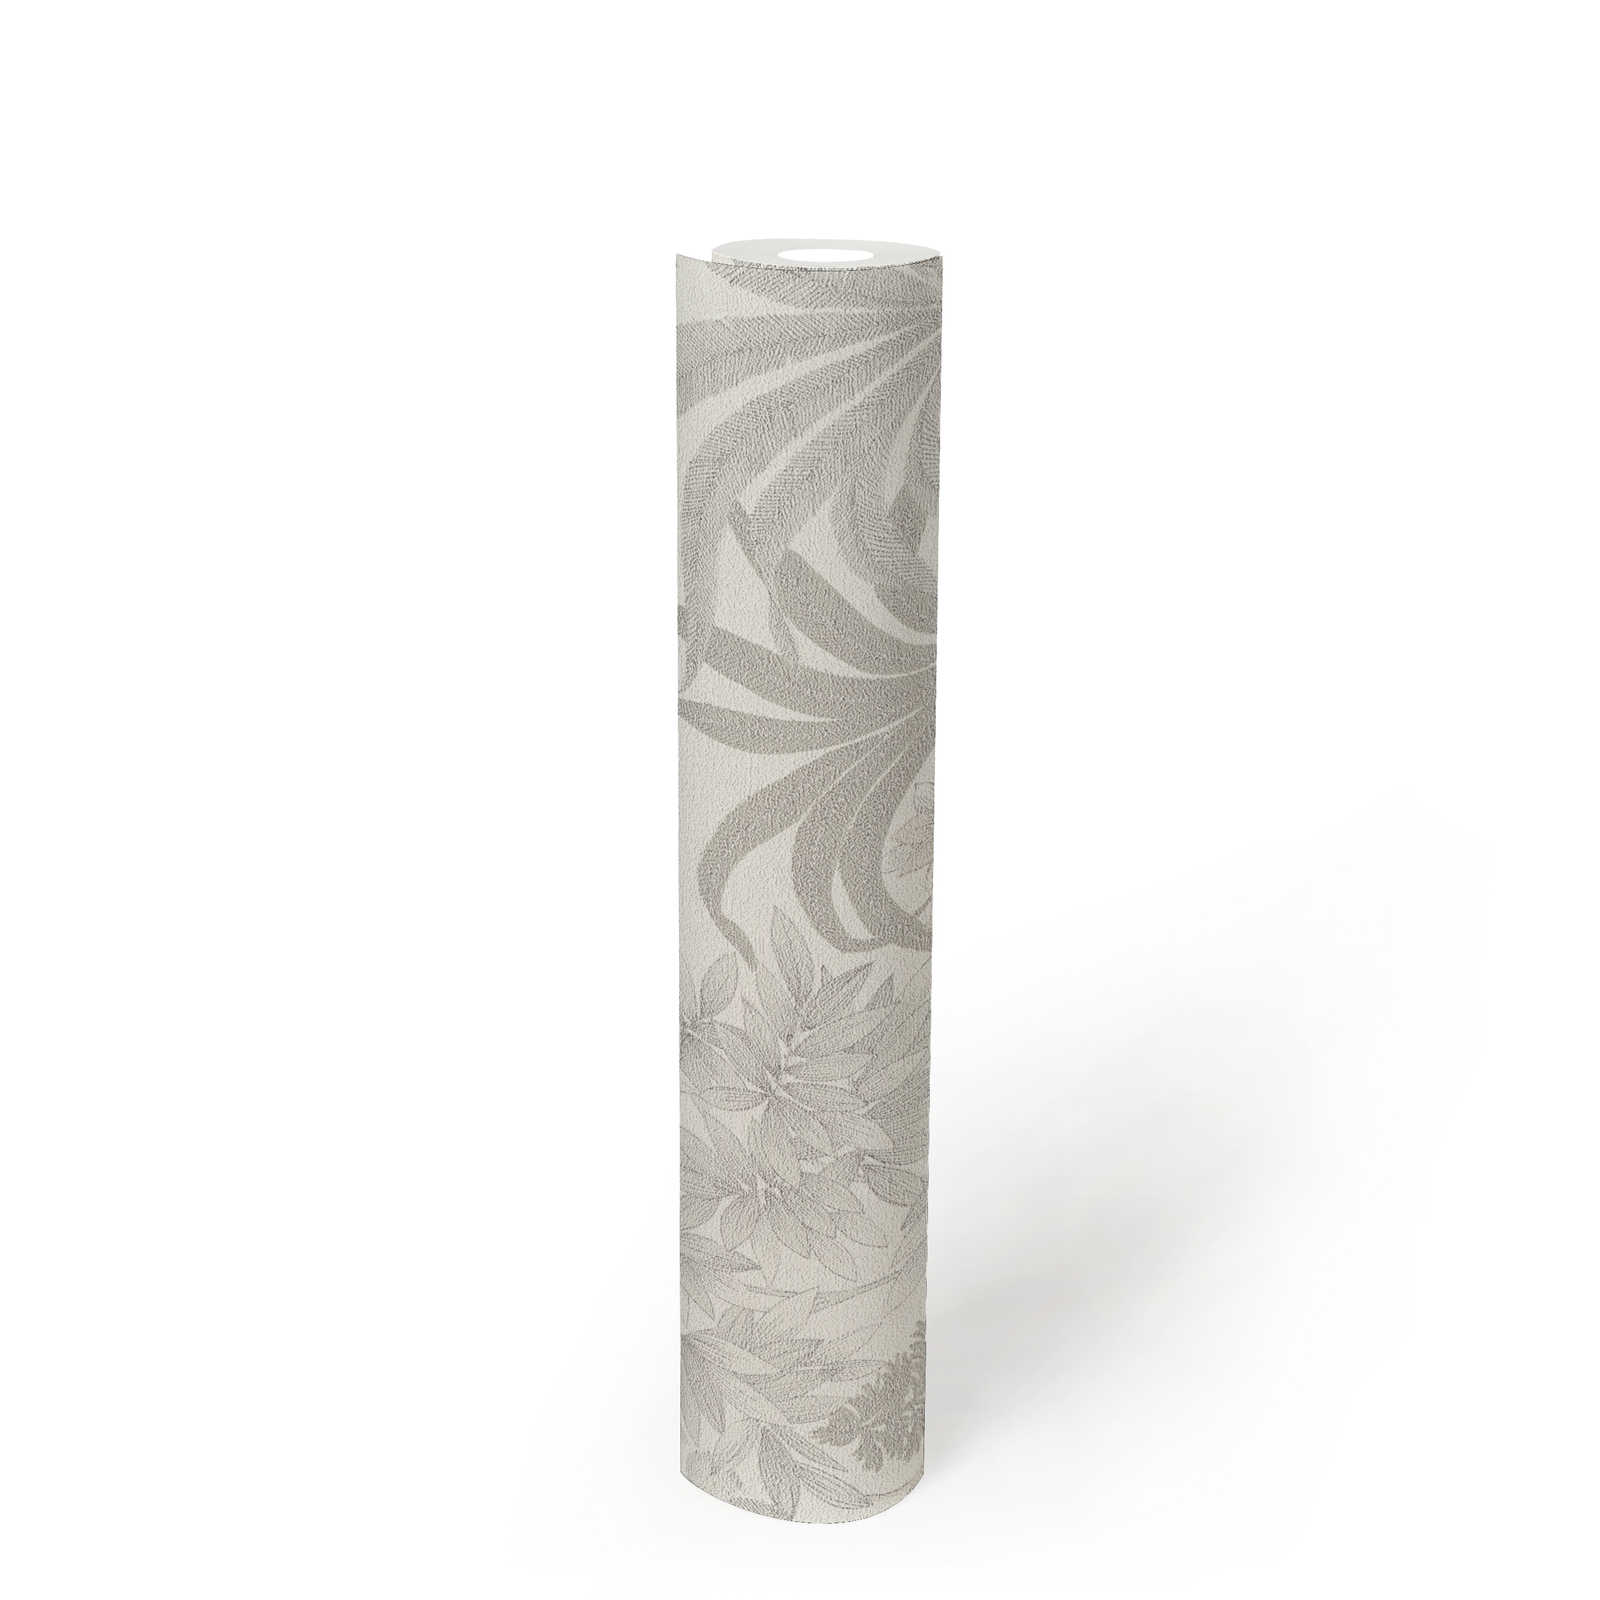             Slightly shiny floral wallpaper in a subtle colour - white, grey, silver
        